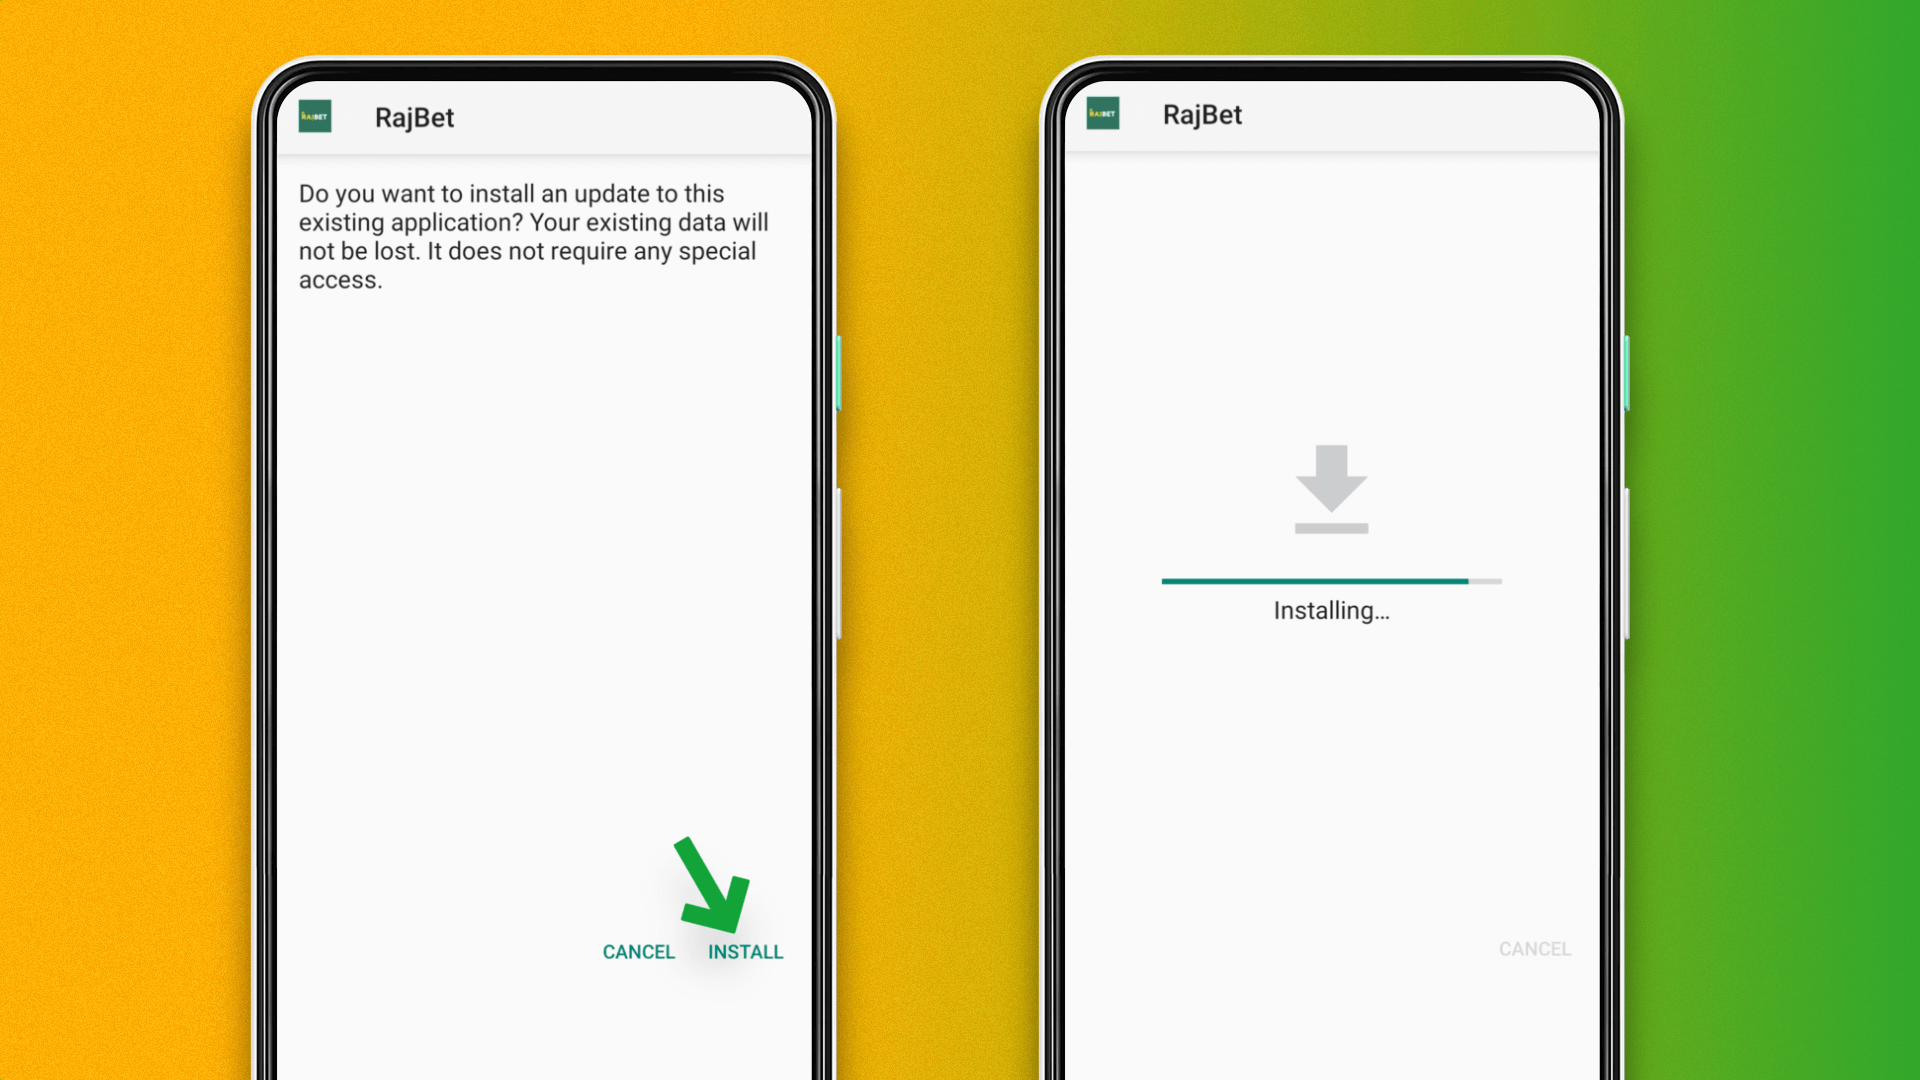 The process of installing the Rajbet app on an Android smartphone